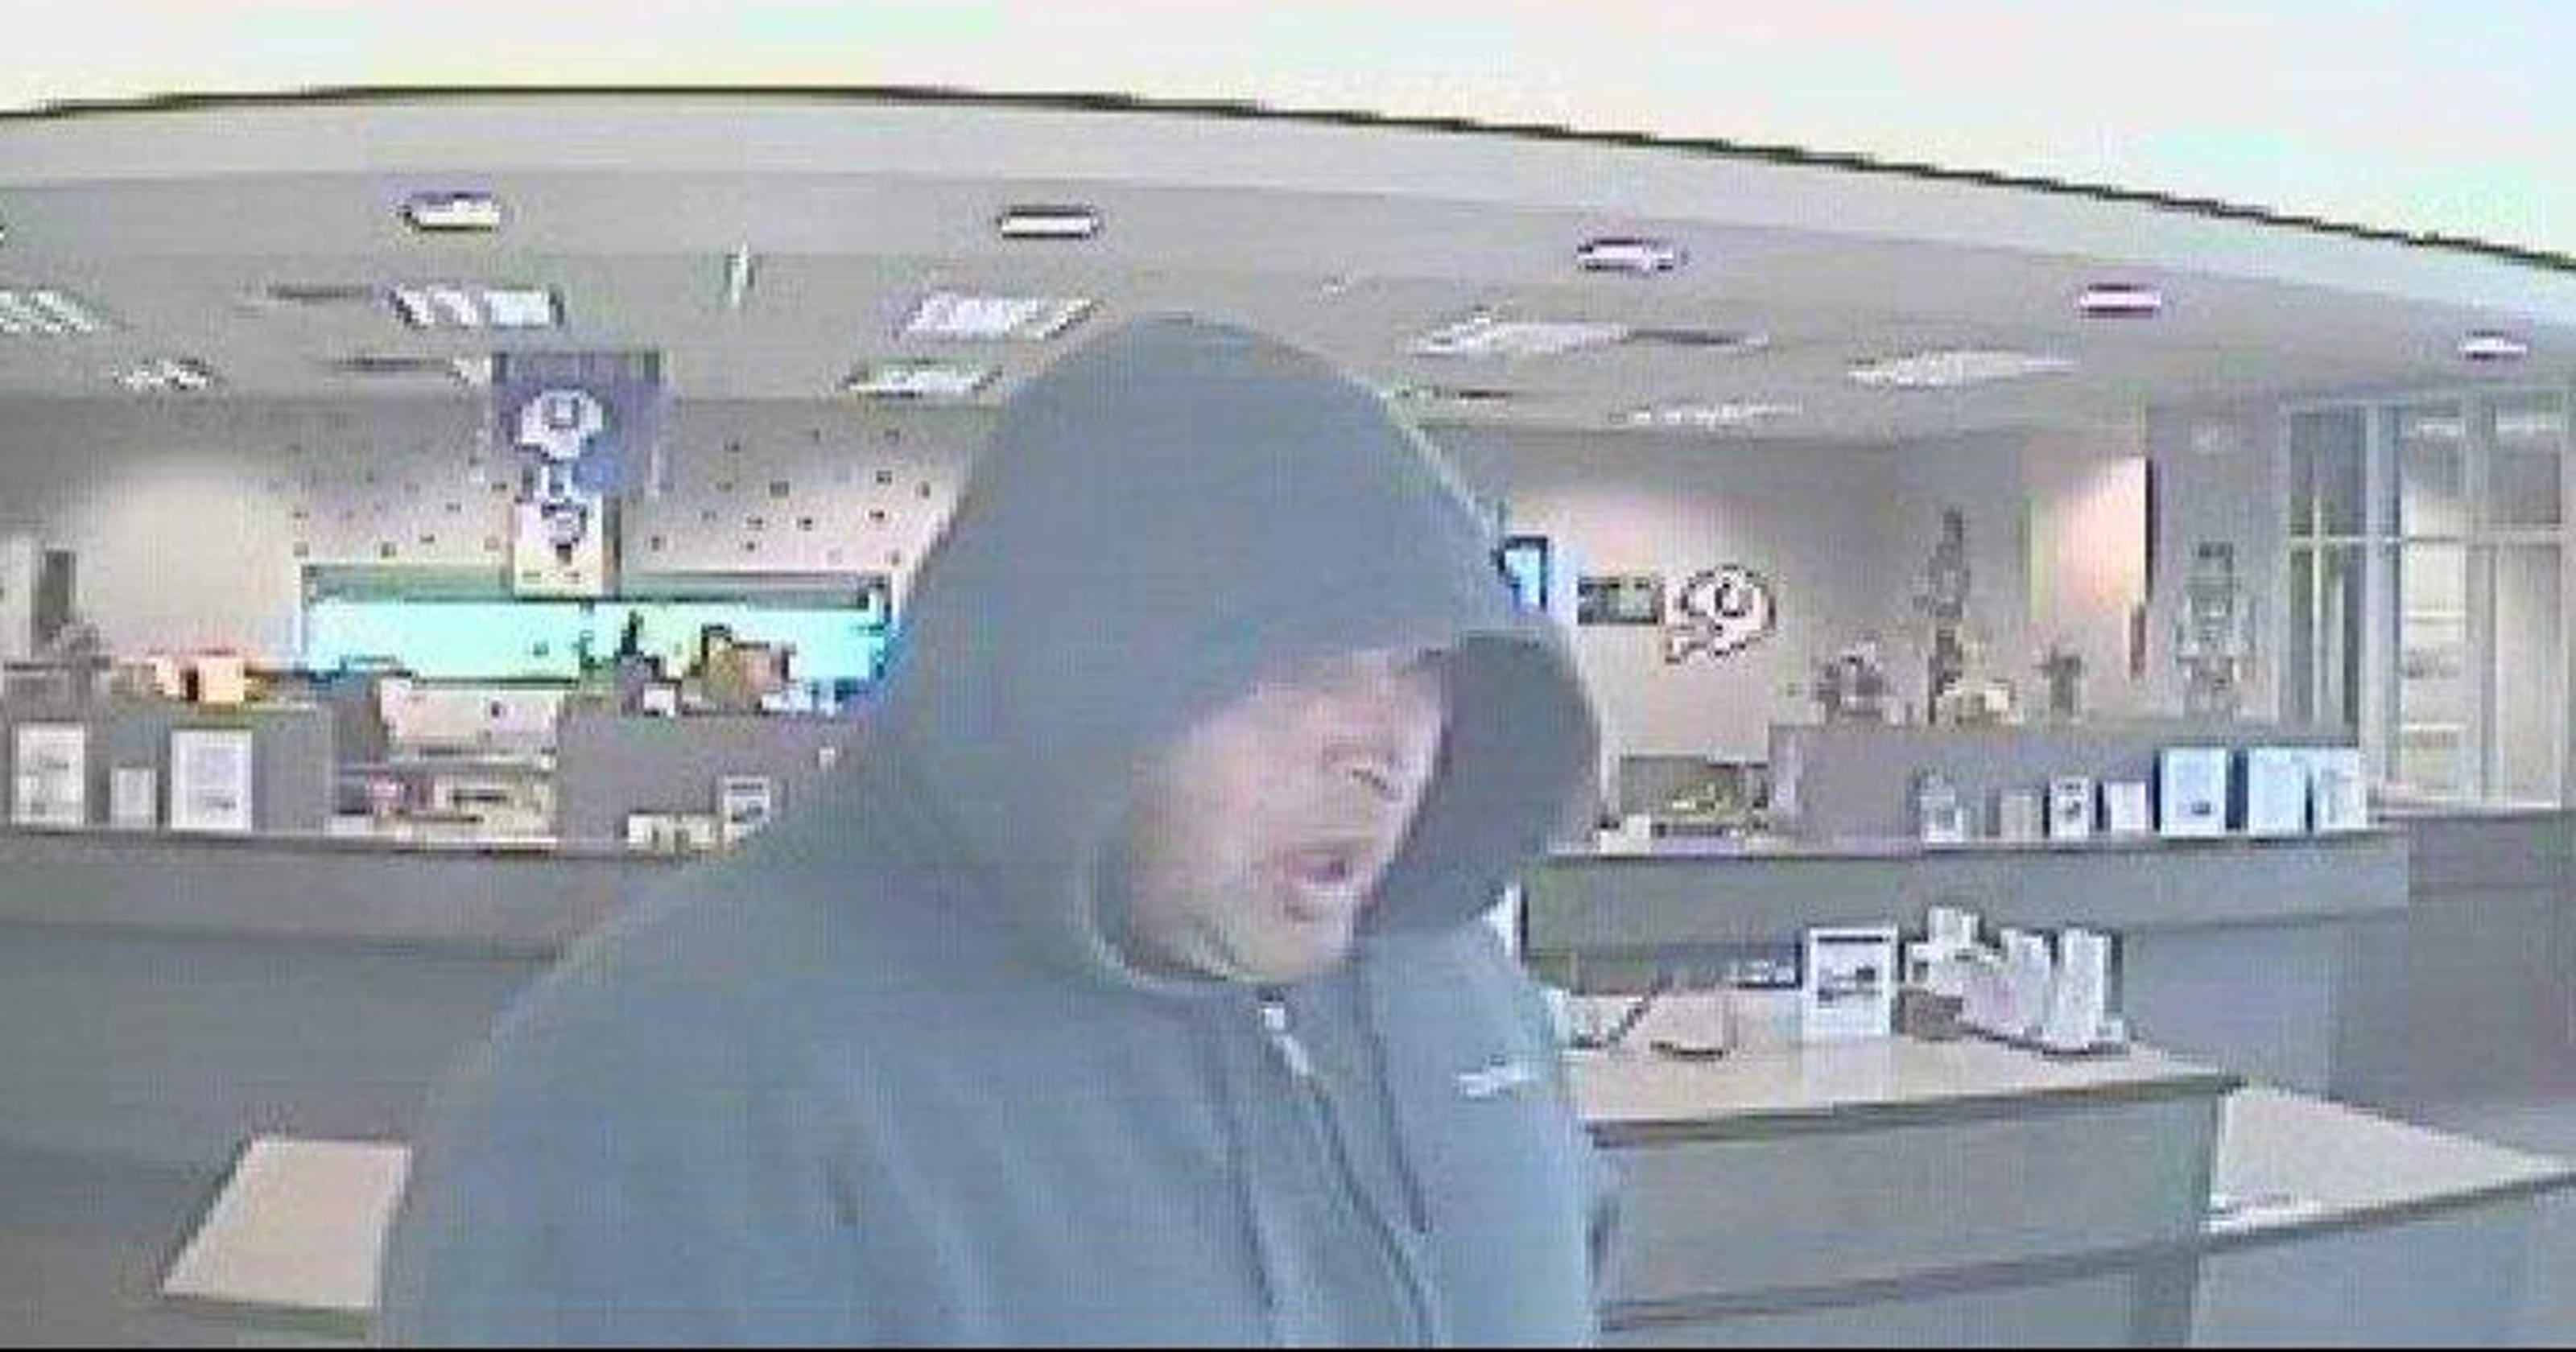 Bank Security Camera Captures Robbery Suspect